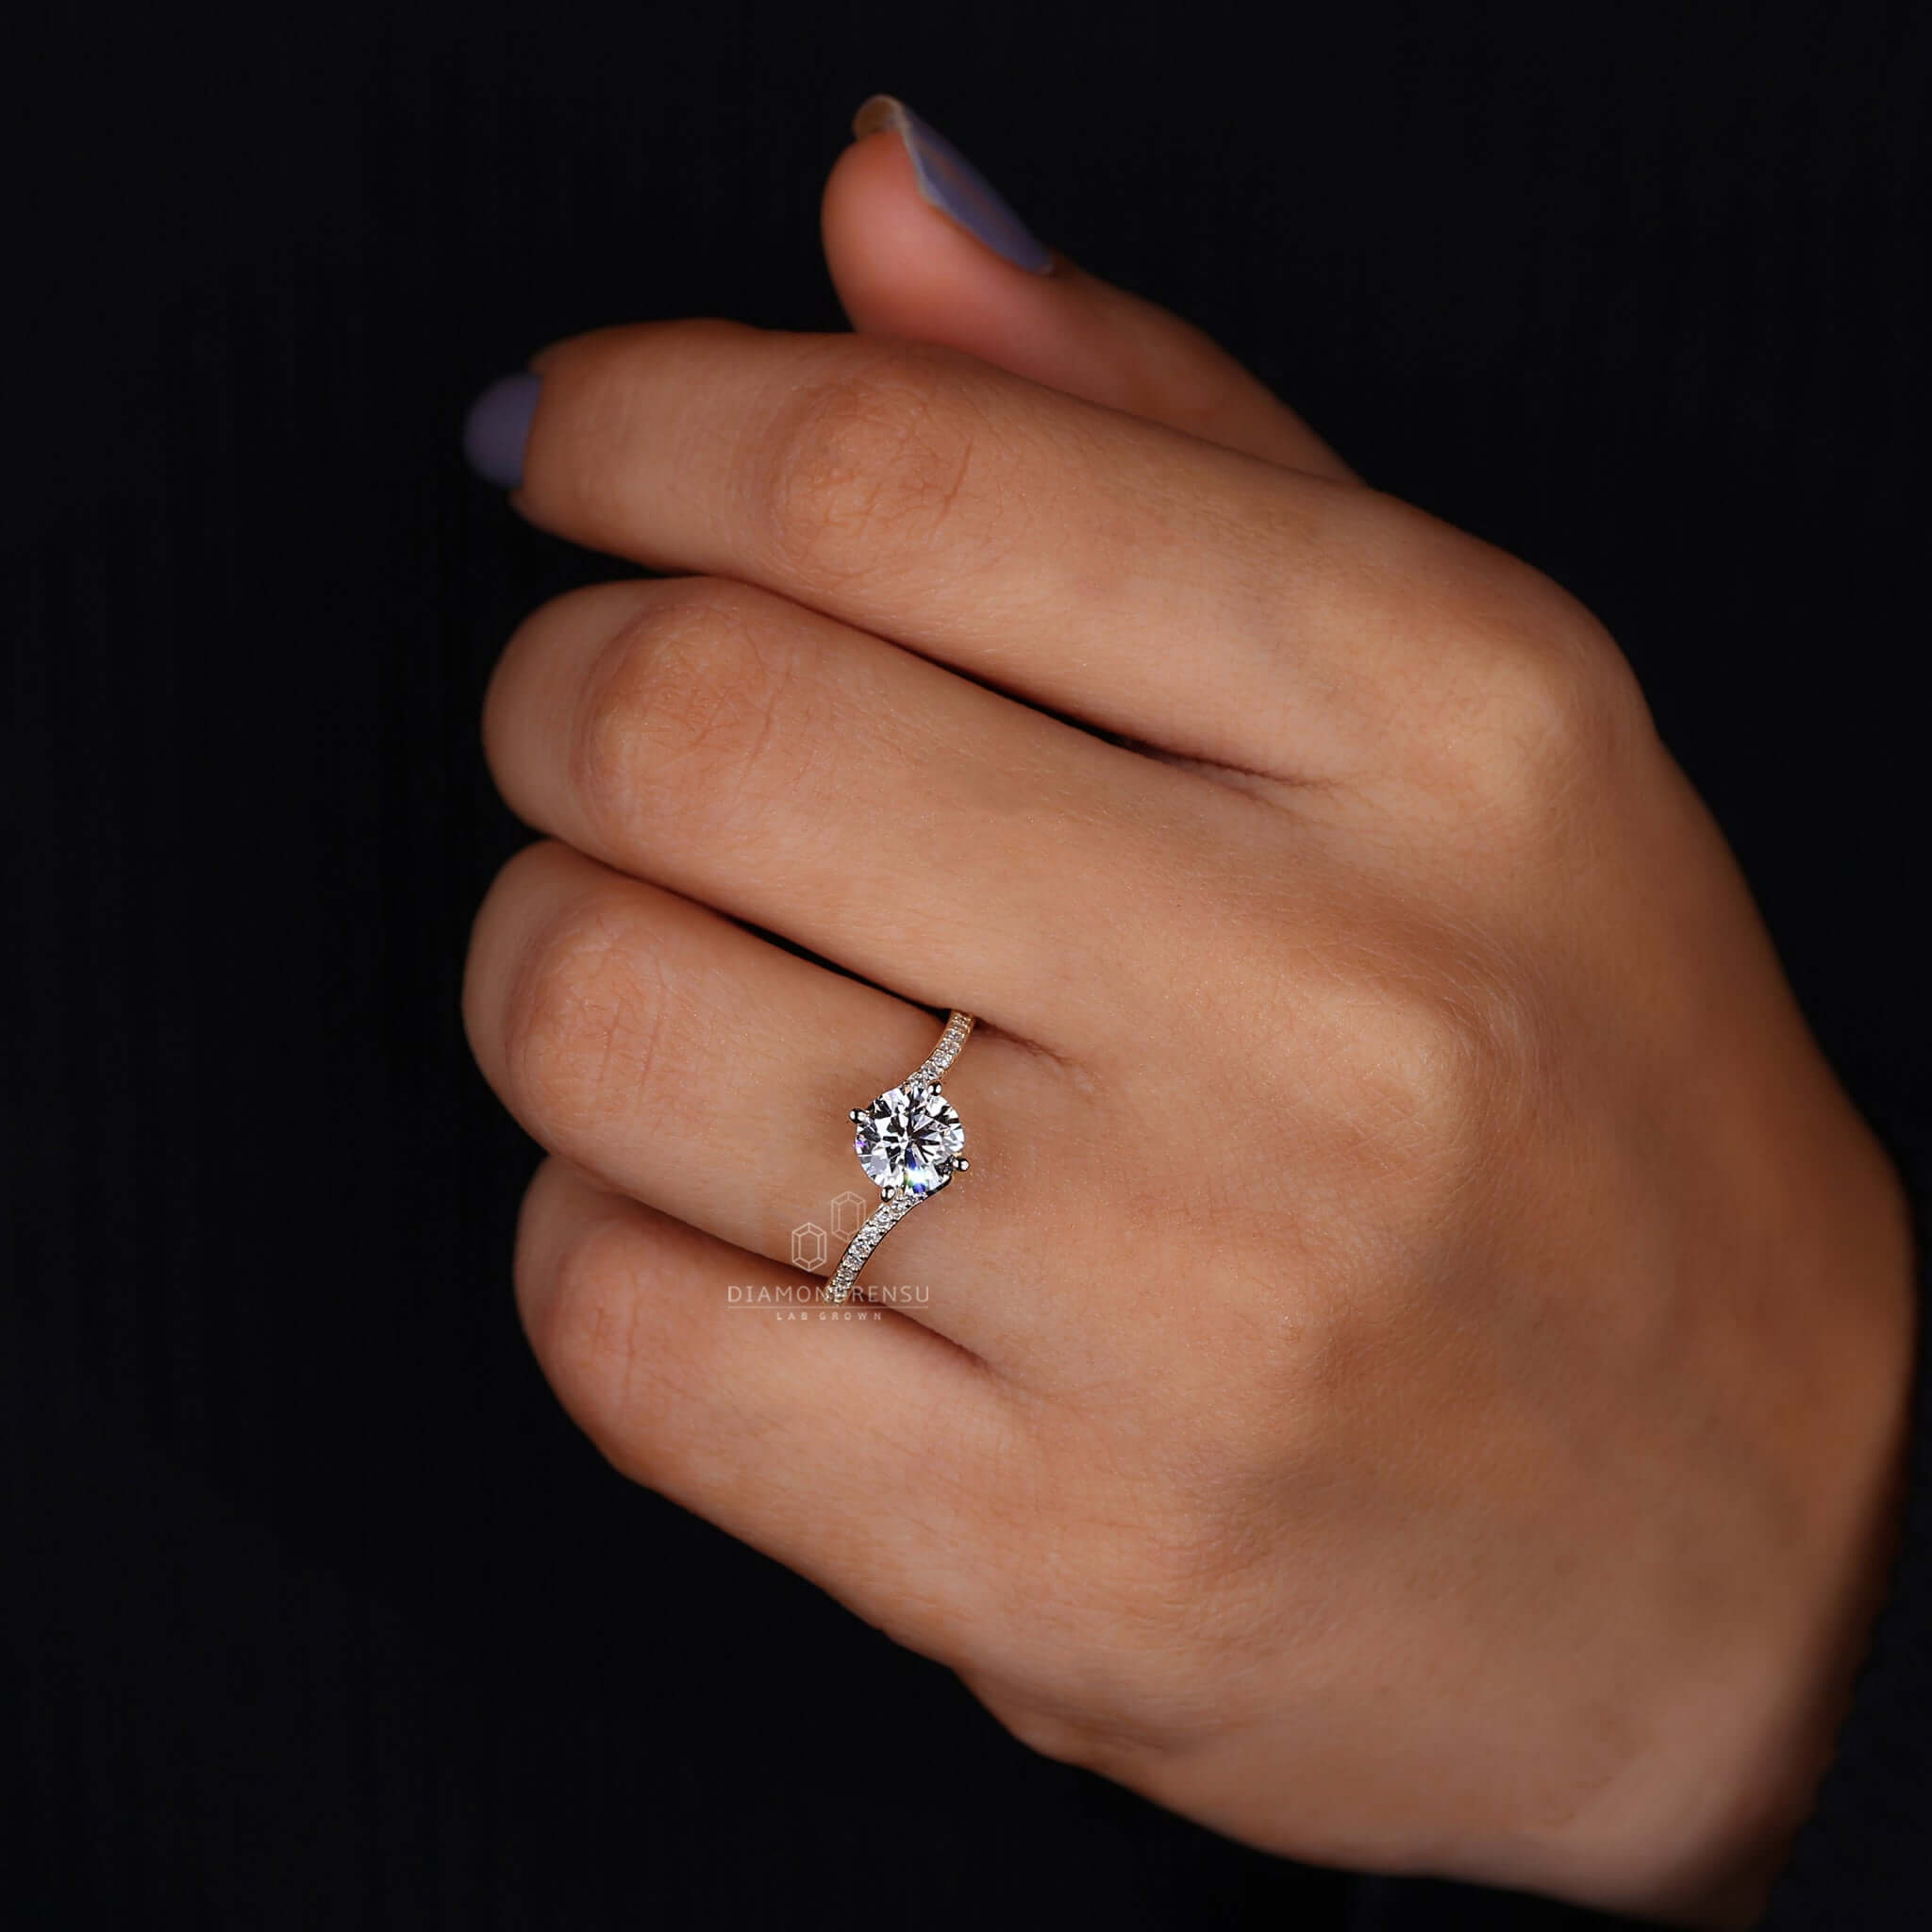 Woman's hand gracefully showcasing a bypass engagement ring, reflecting a modern twist on romance